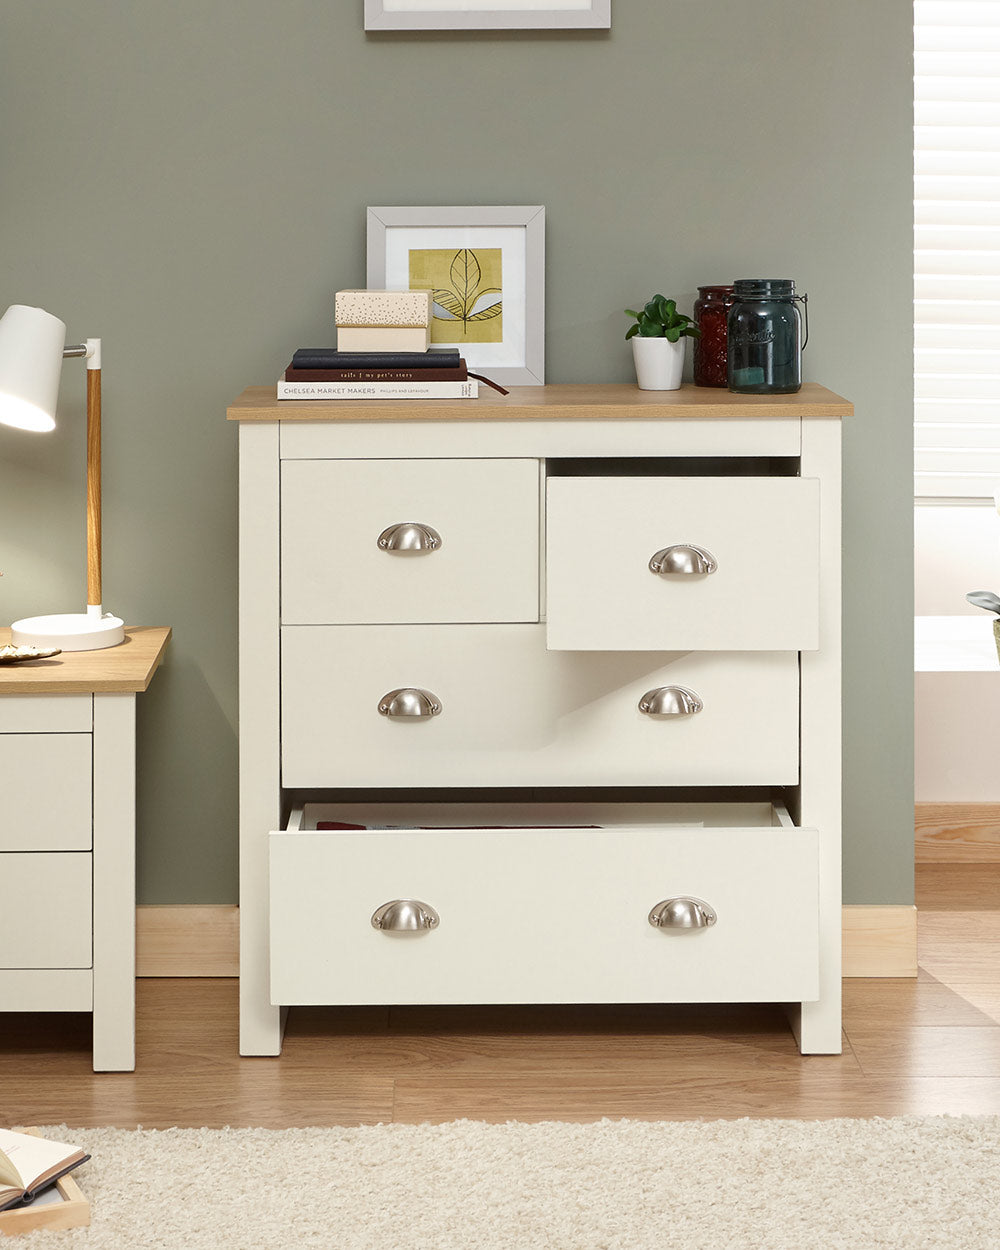 Lancaster 2 + 2 chest of drawers in cream with an oak effect top in a lifestyle setting in a bedroom with the drawers open